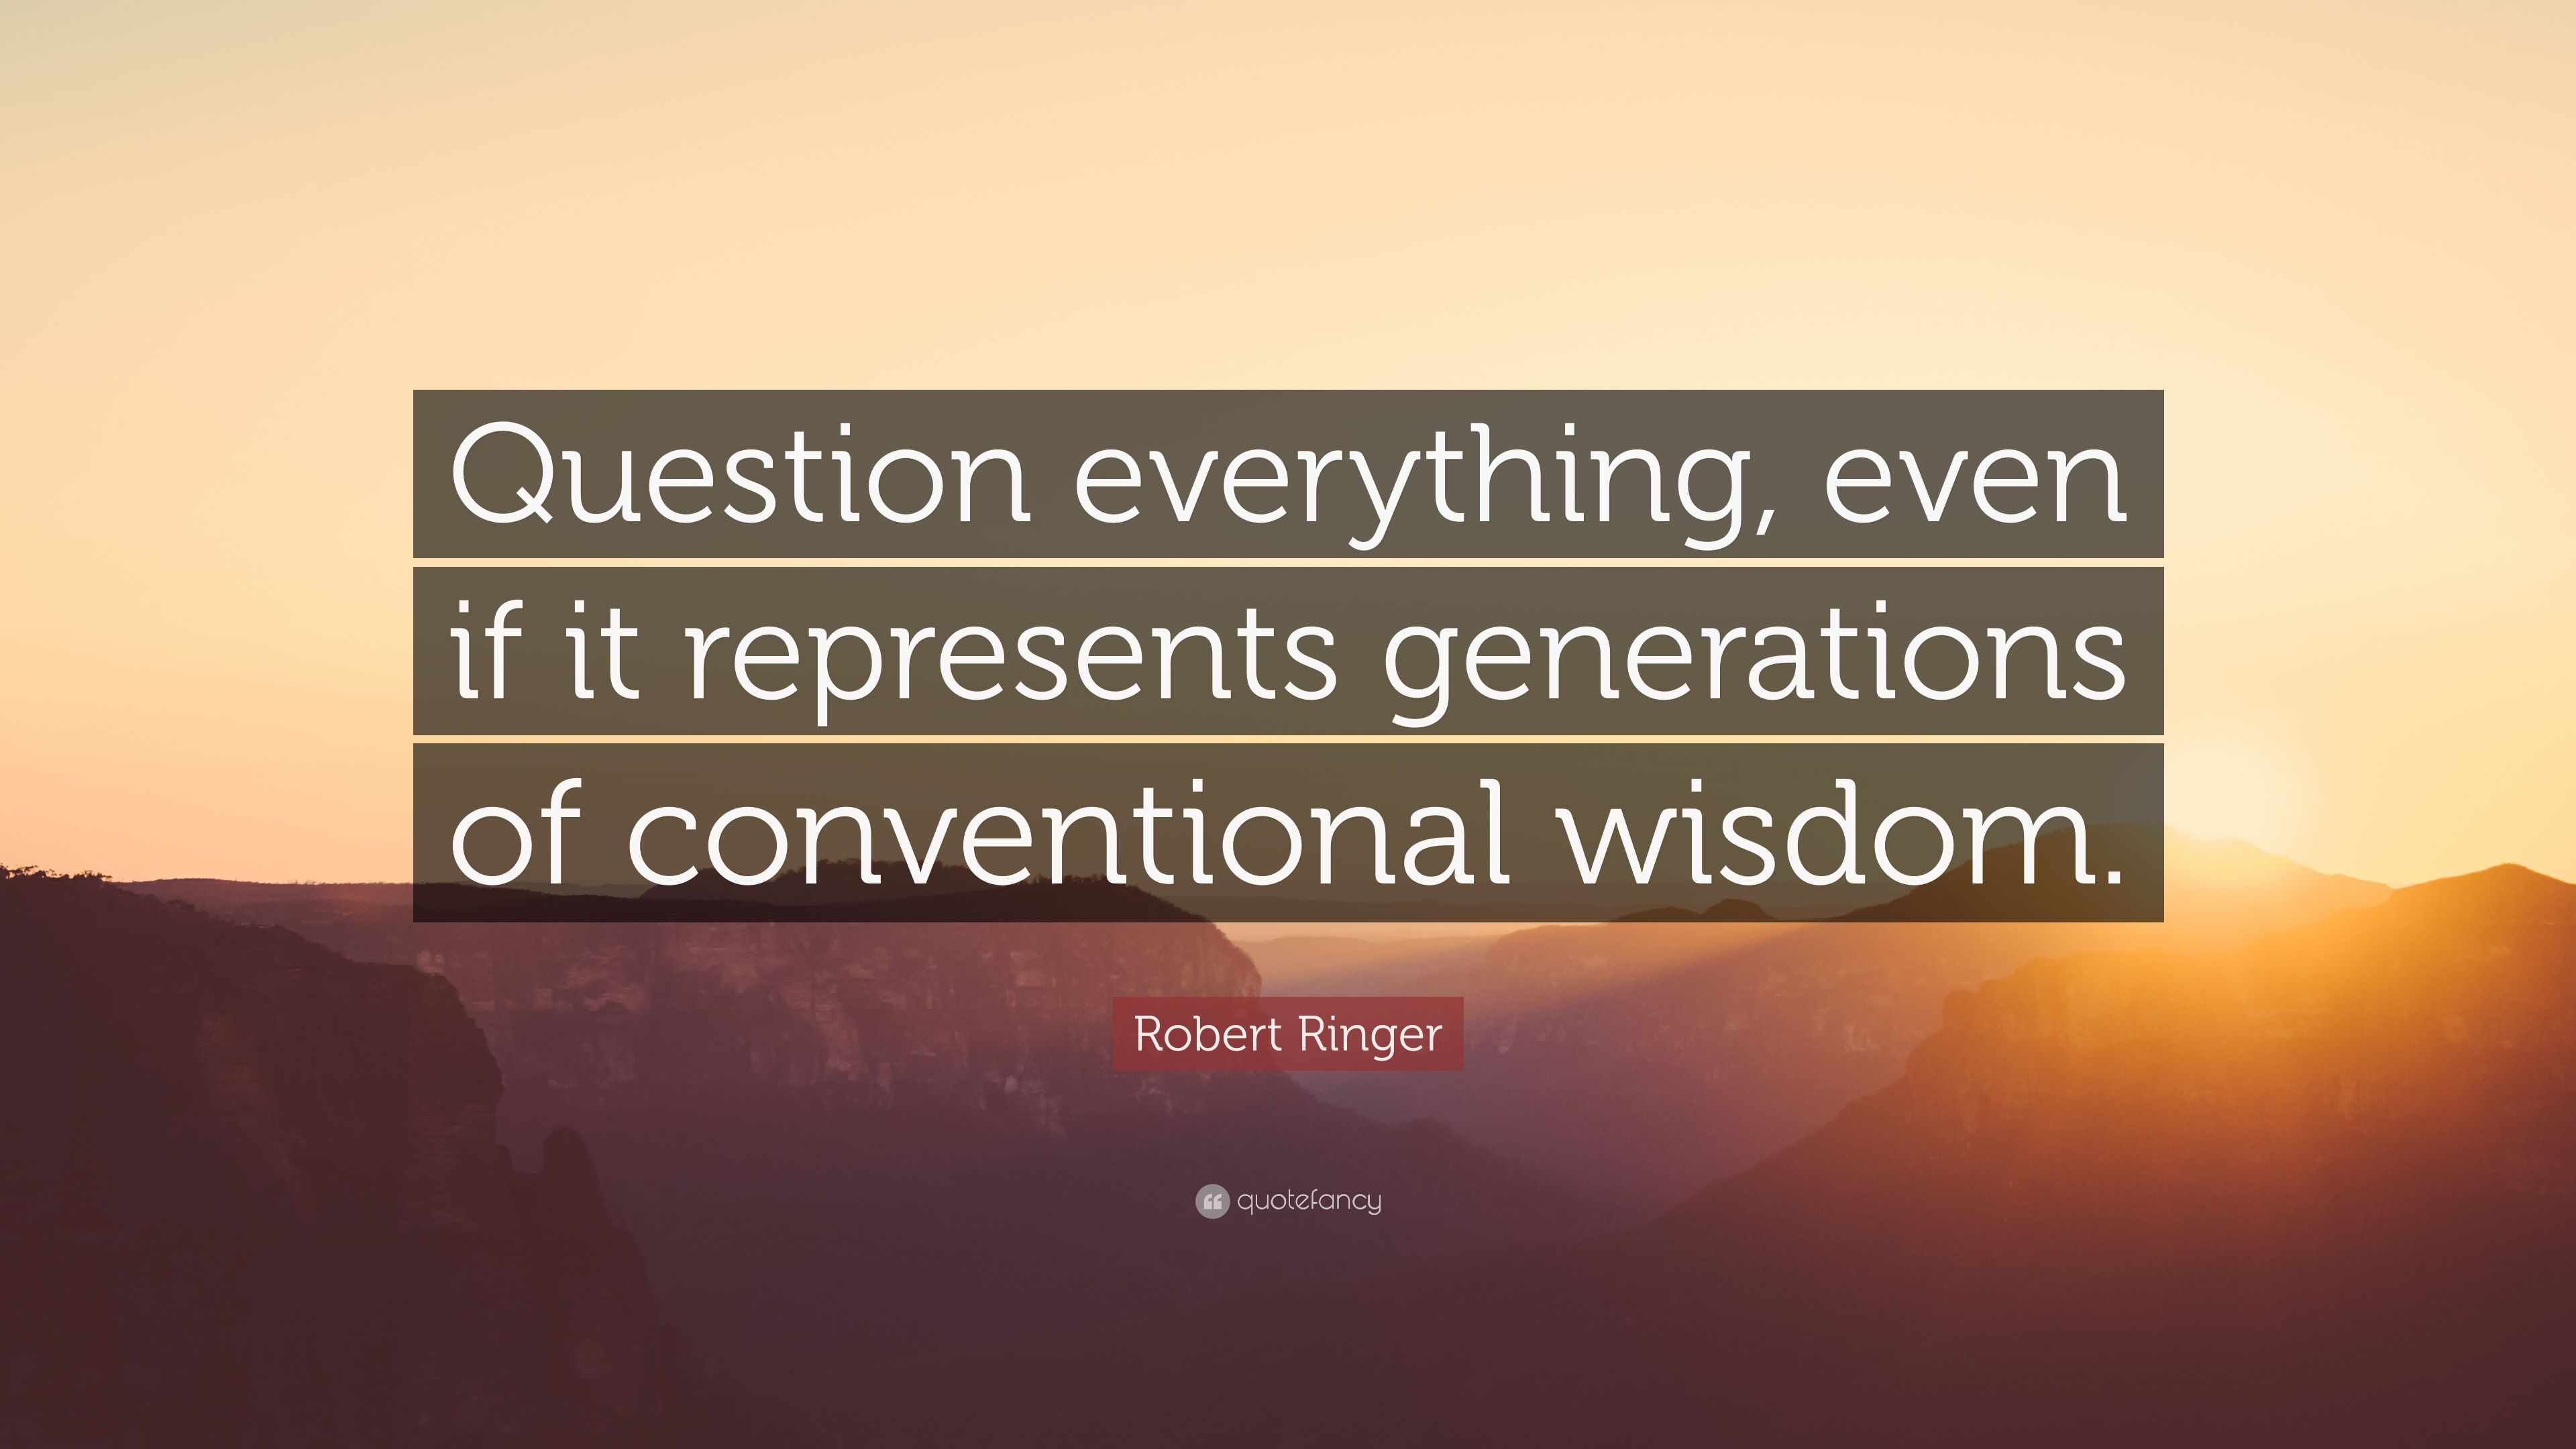 Robert Ringer Quote: “Question everything, even if it represents generations of conventional wisdom.” (7 wallpaper)